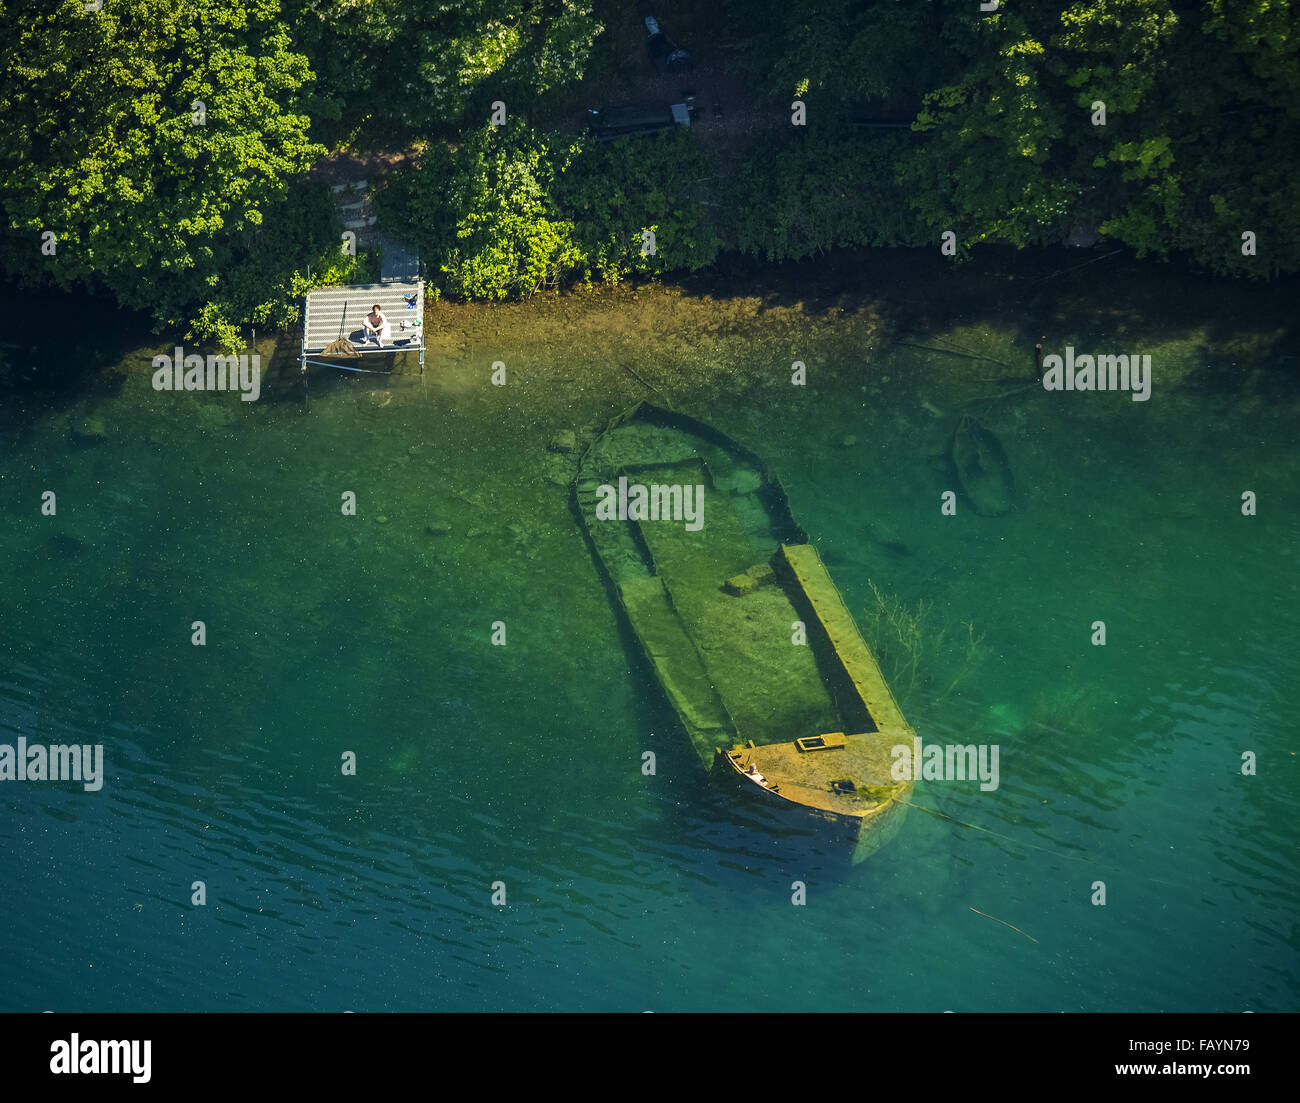 Aerial view, sunken boat with fishermen on Escher lake in Cologne, green turquoise waters, Cologne, Rhineland, Stock Photo